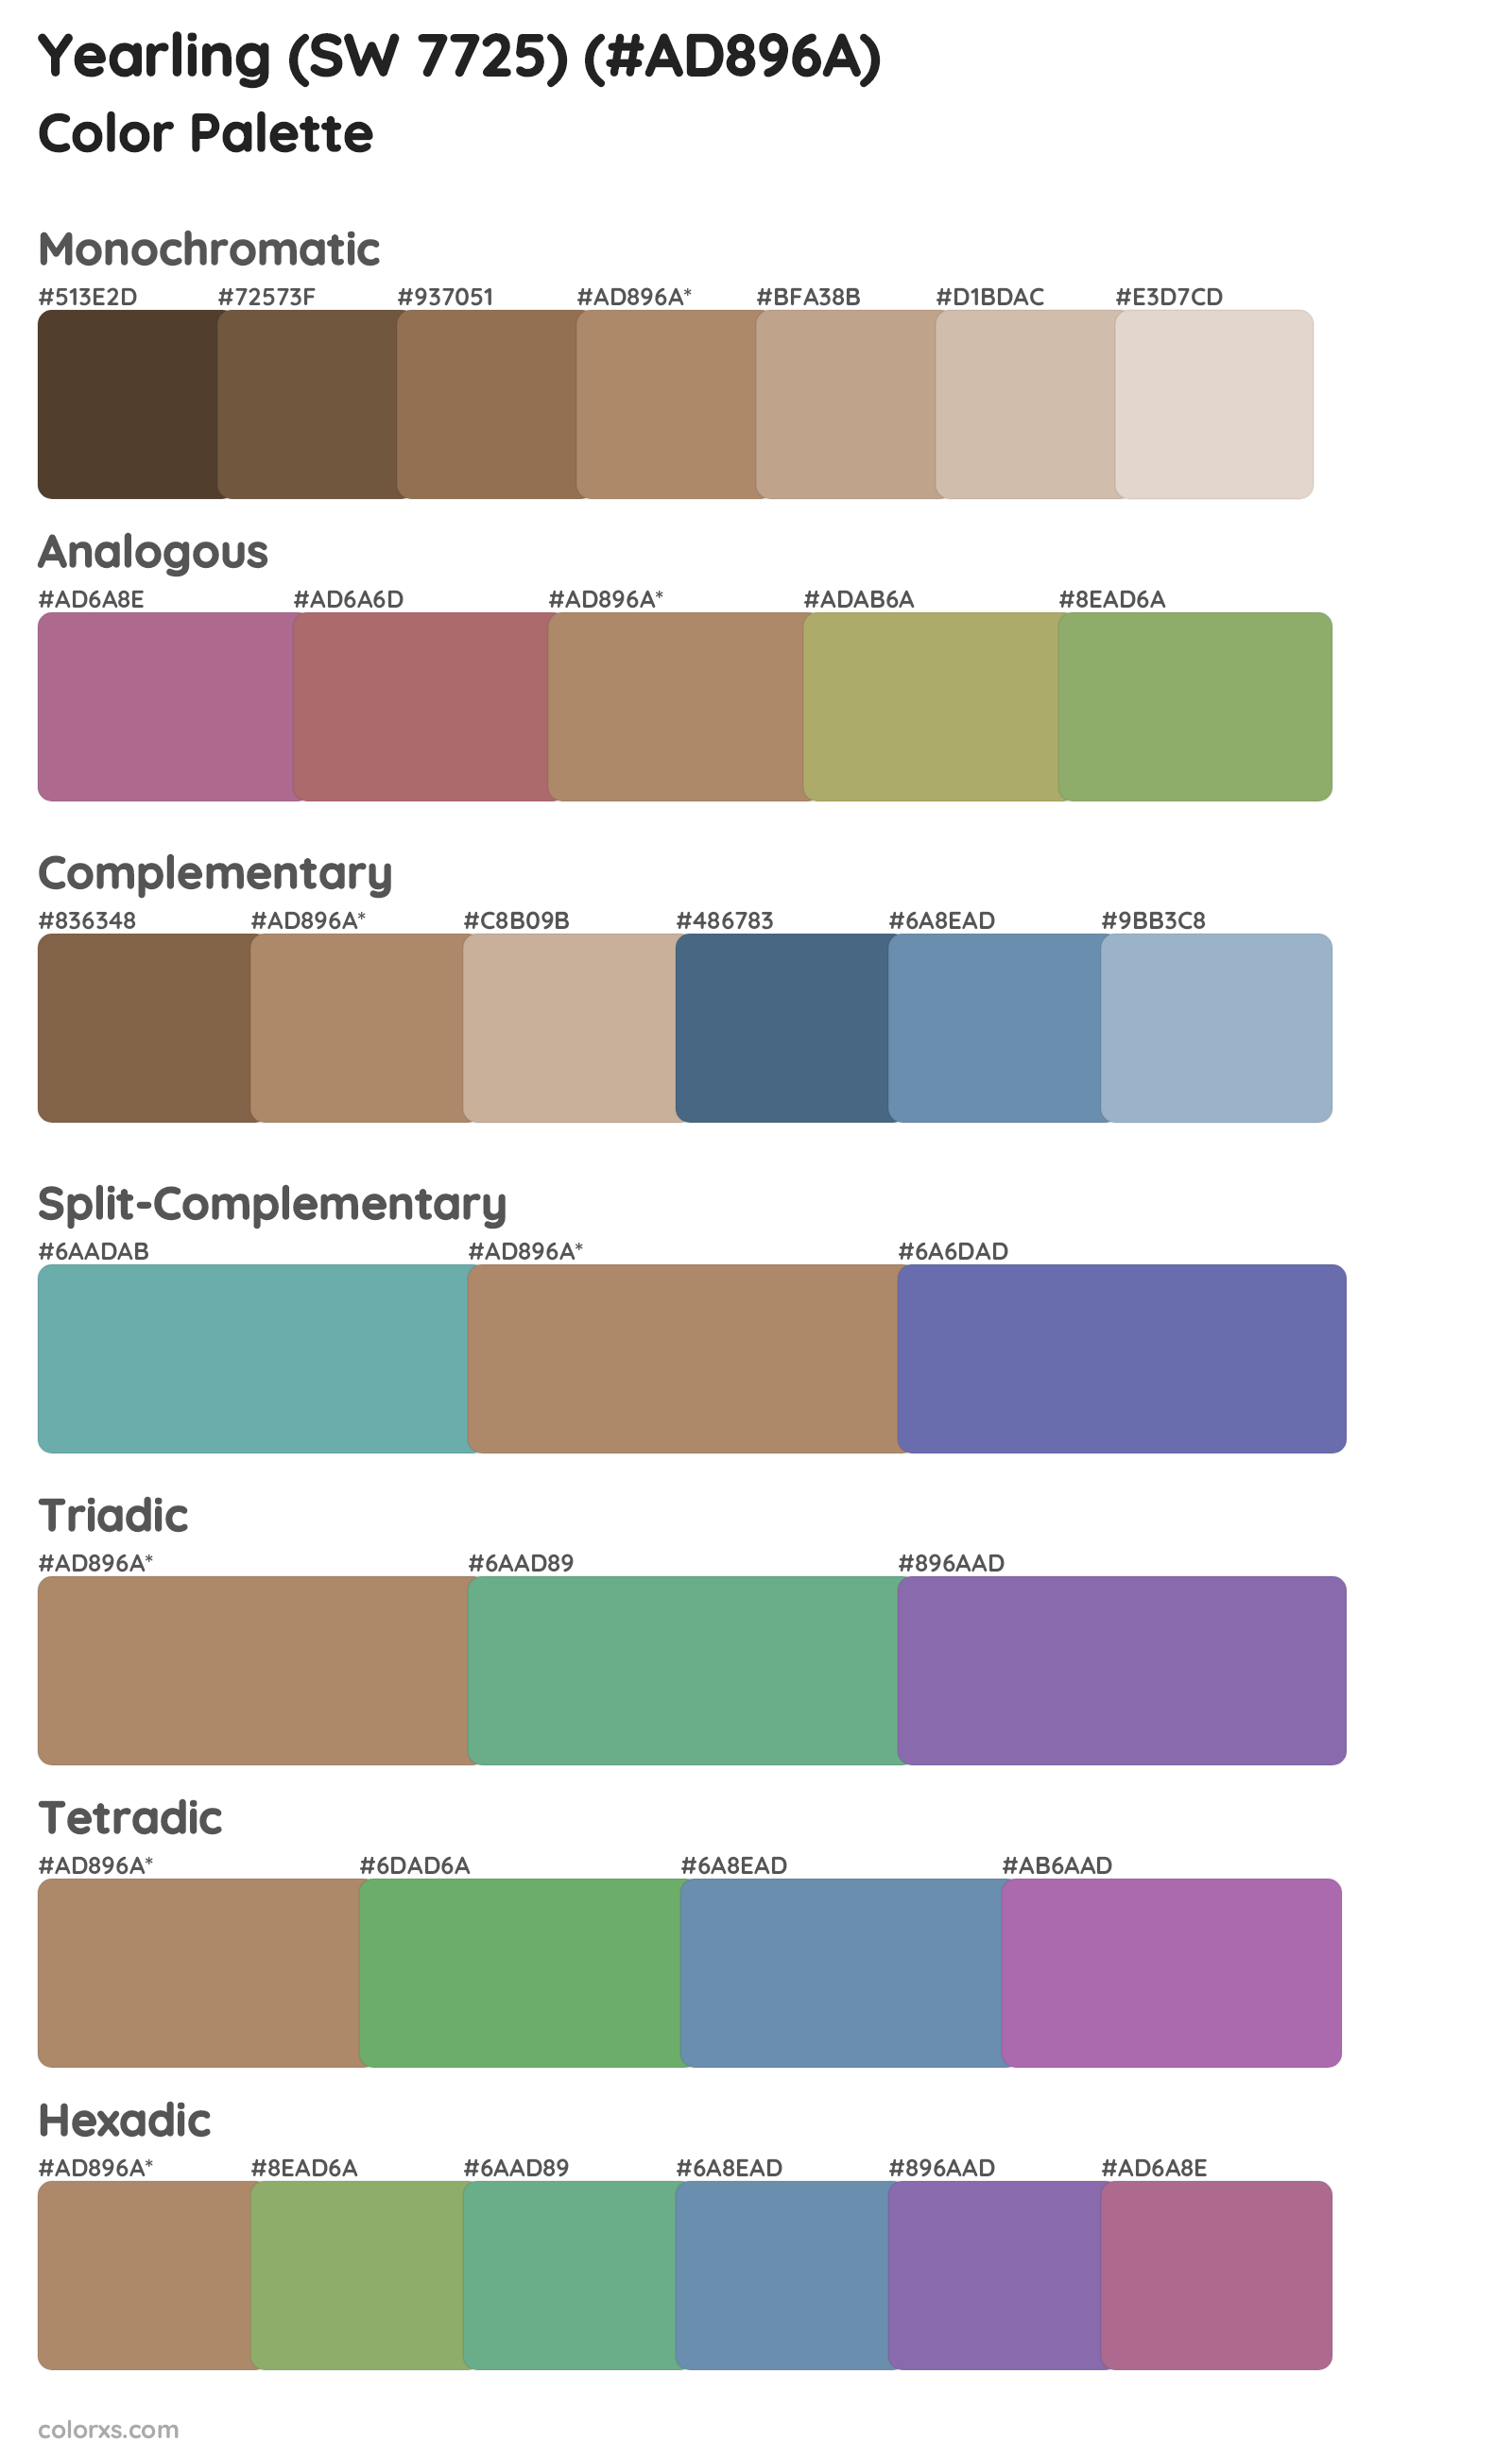 Yearling (SW 7725) Color Scheme Palettes